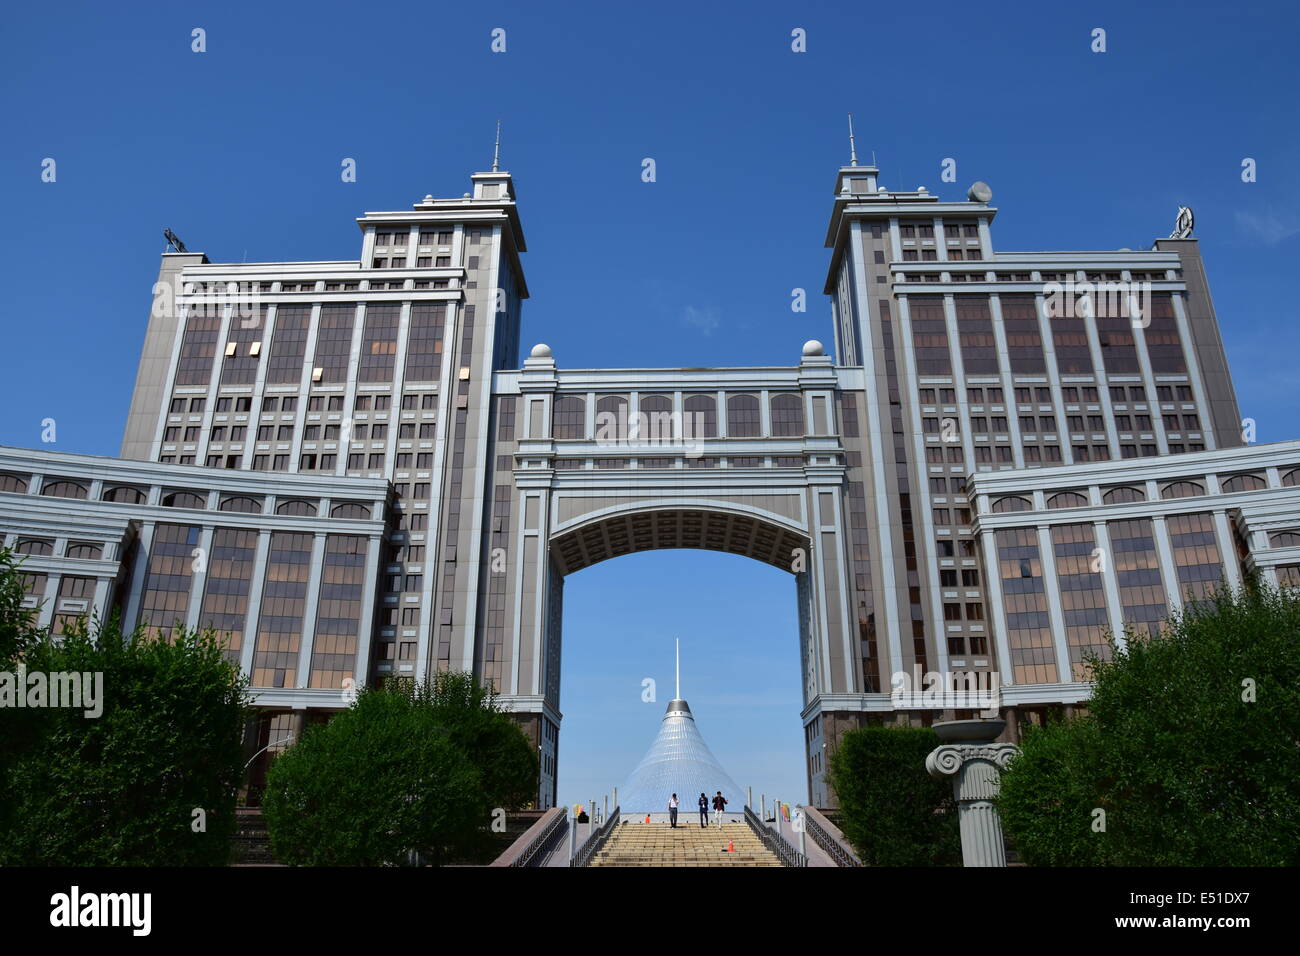 A city view of Astana / Kazakhstan with the KazMunaiGaz building and the Khan Shatyr cupola visible through the arch Stock Photo